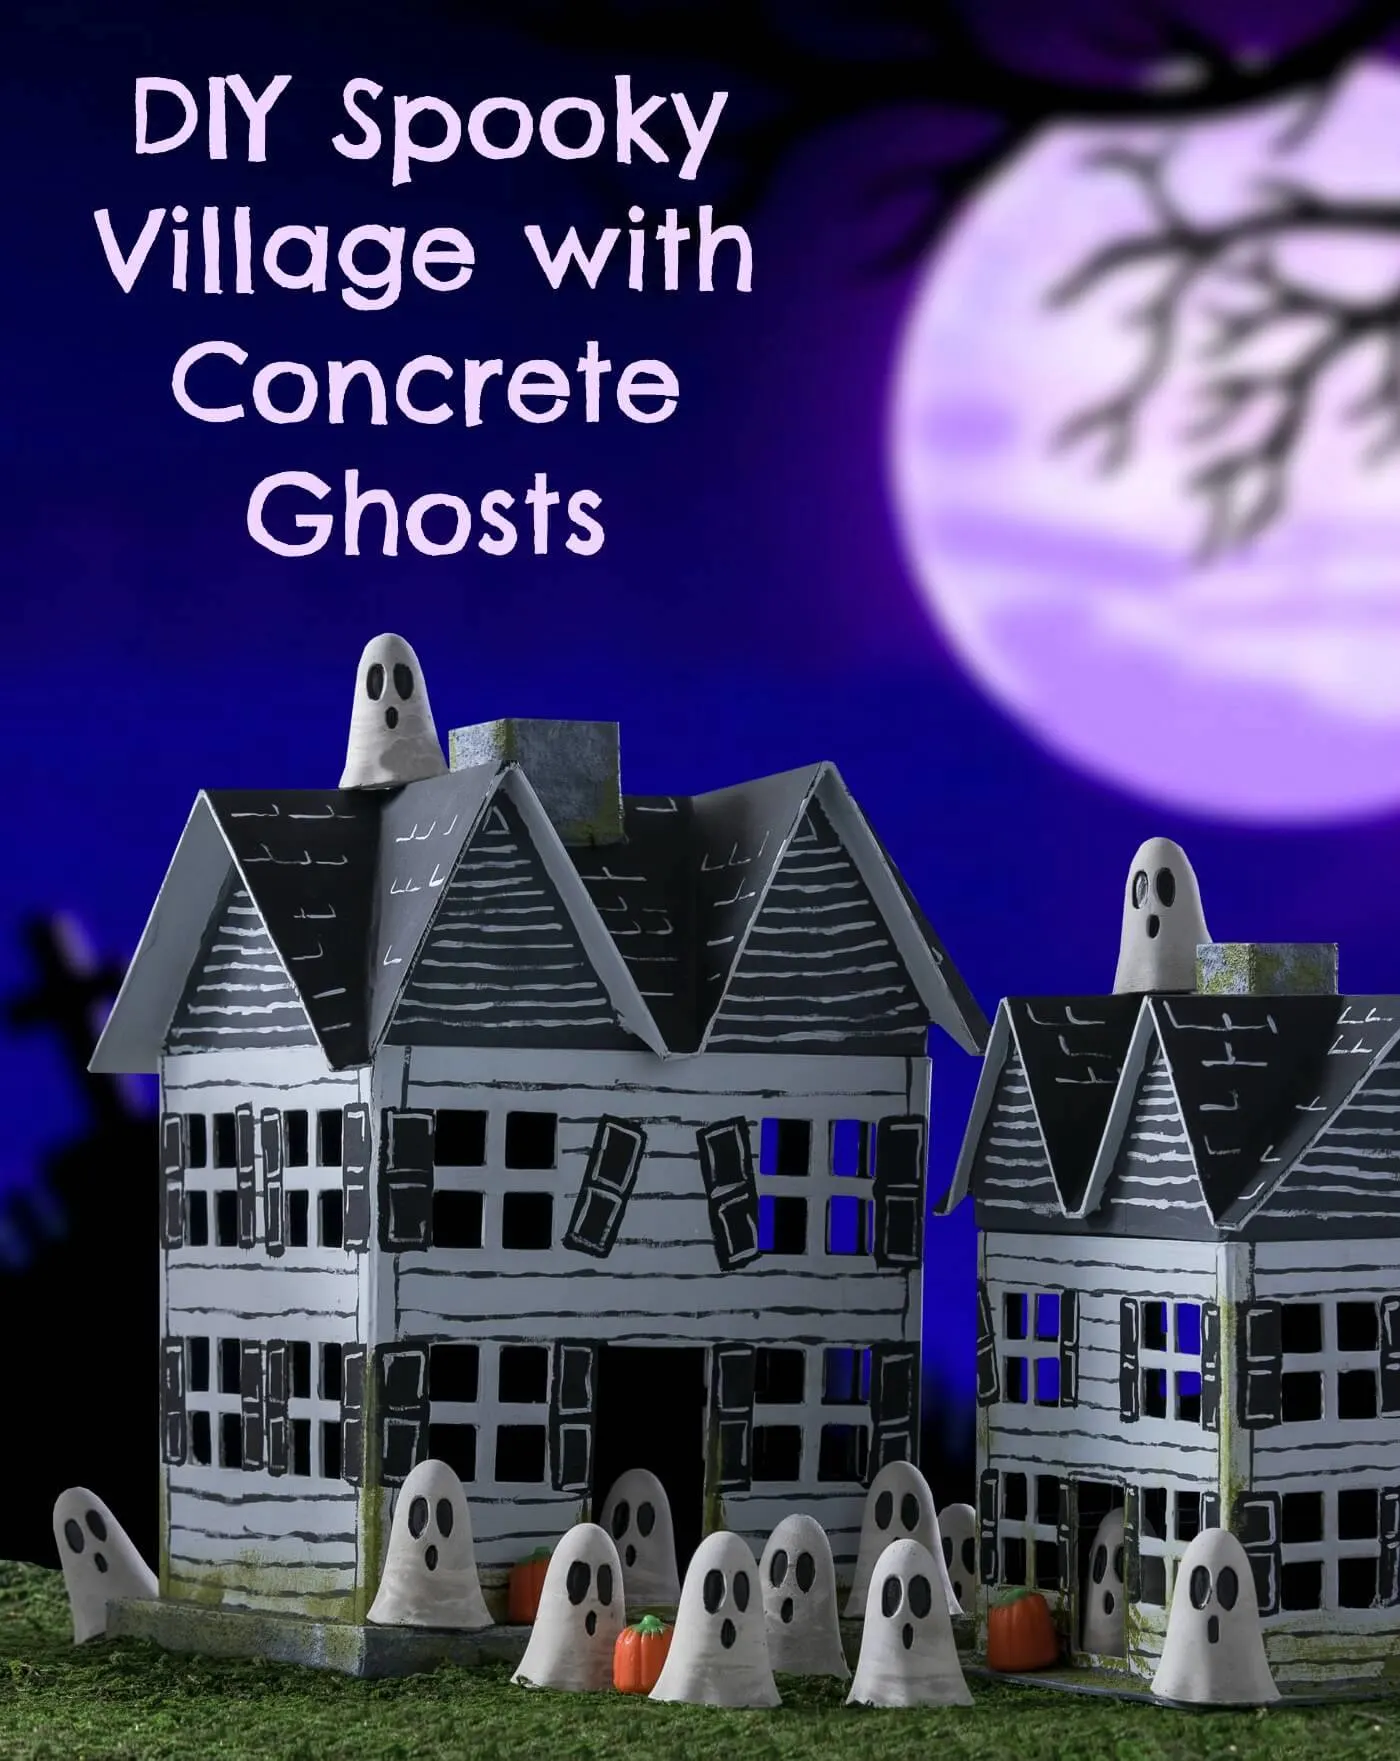 DIY Halloween Village with Spooky Mini Ghosts!